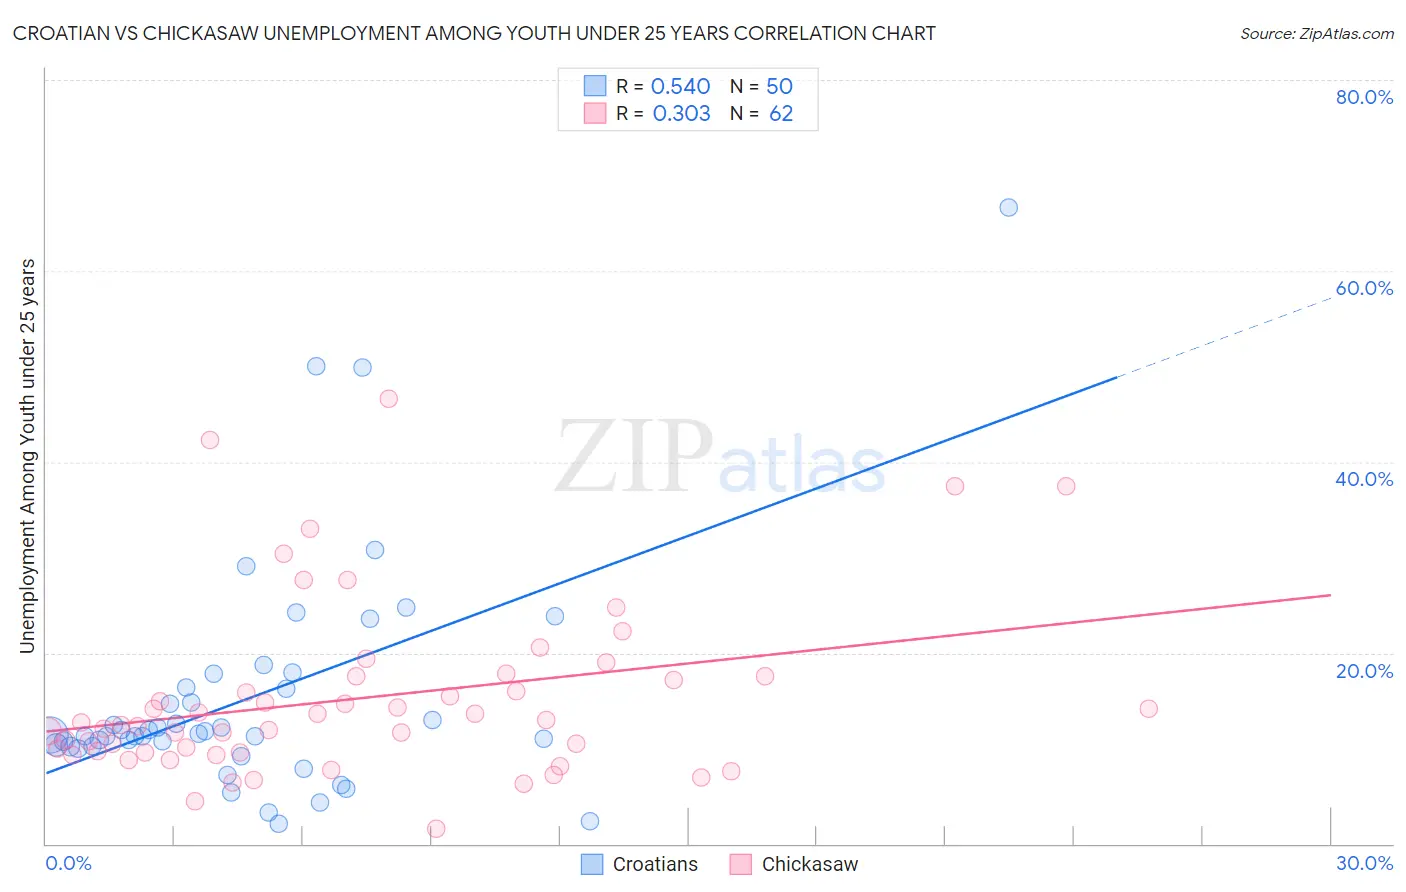 Croatian vs Chickasaw Unemployment Among Youth under 25 years